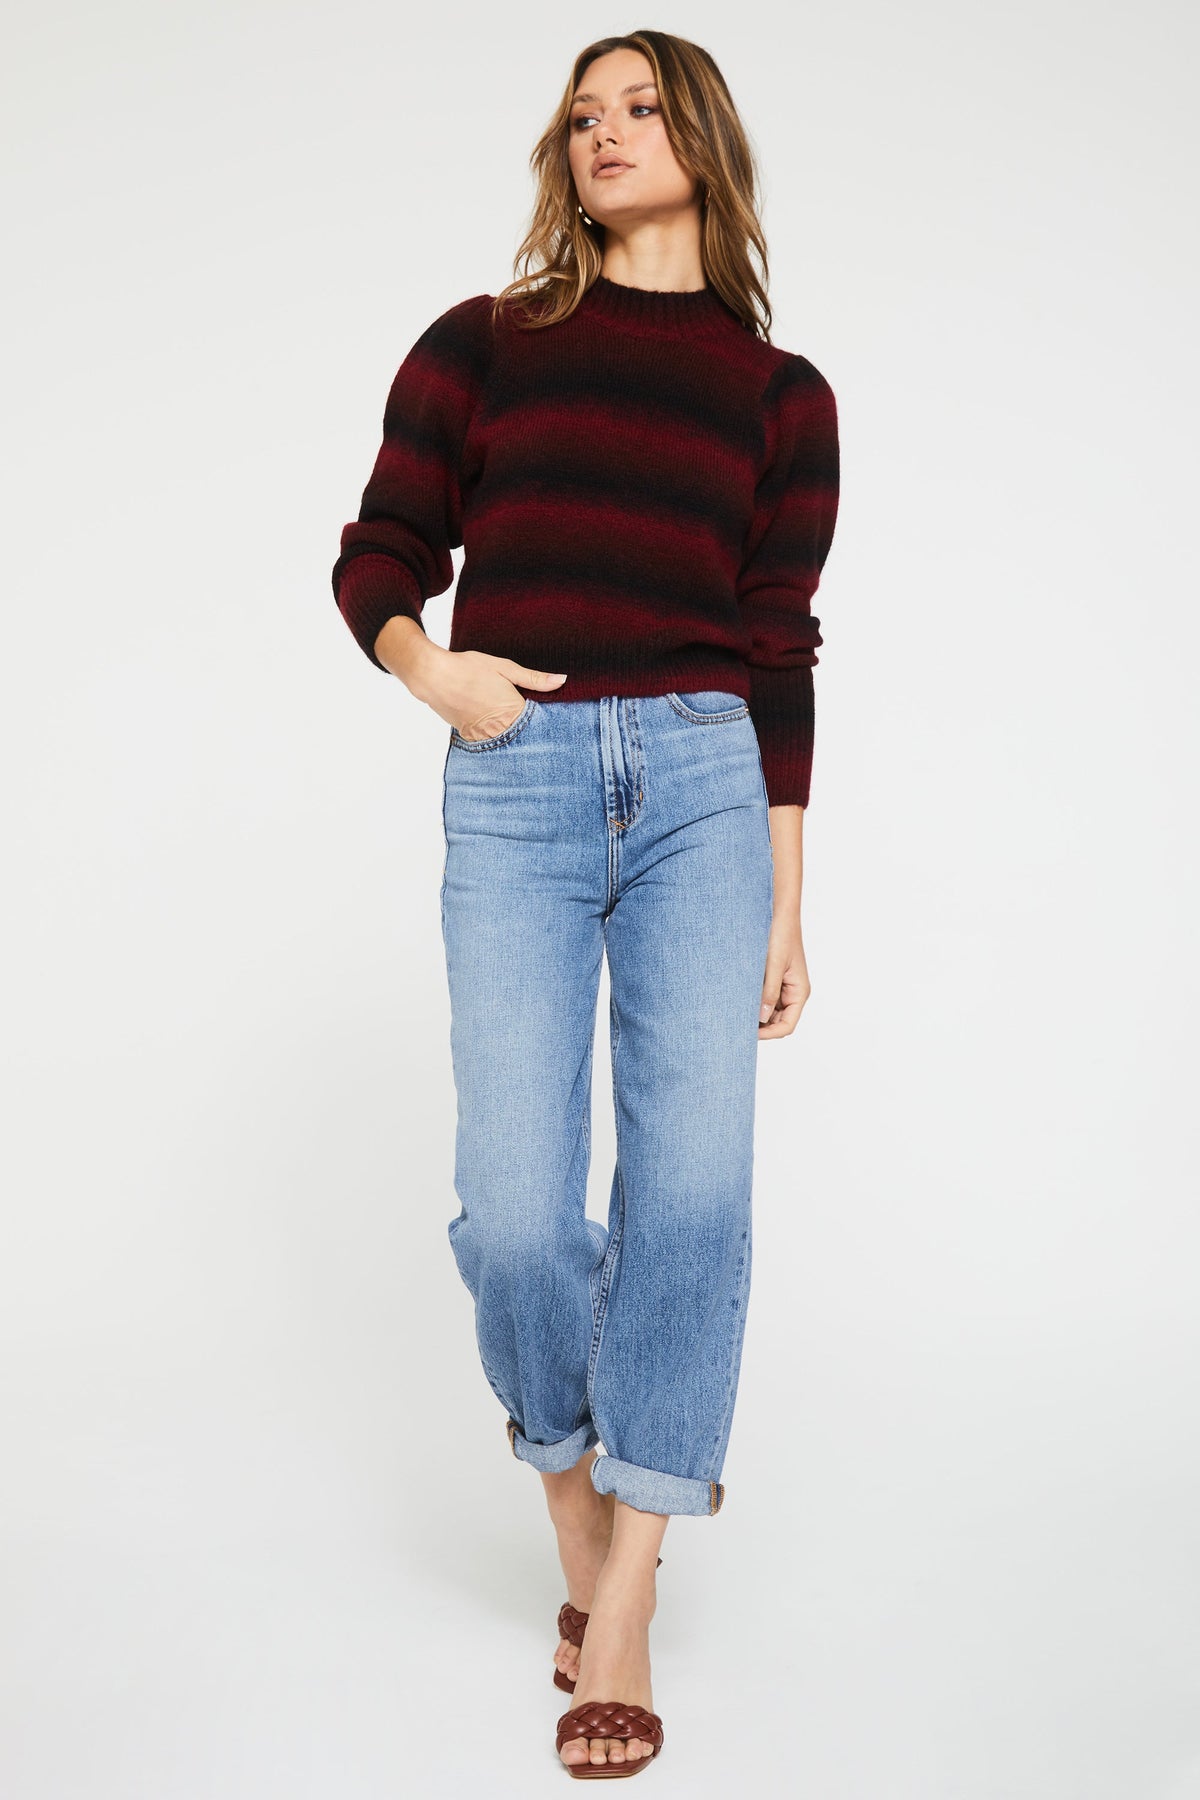 shira-long-sleeve-sweater-tawny-port-stripe-full-image-another-love-clothing